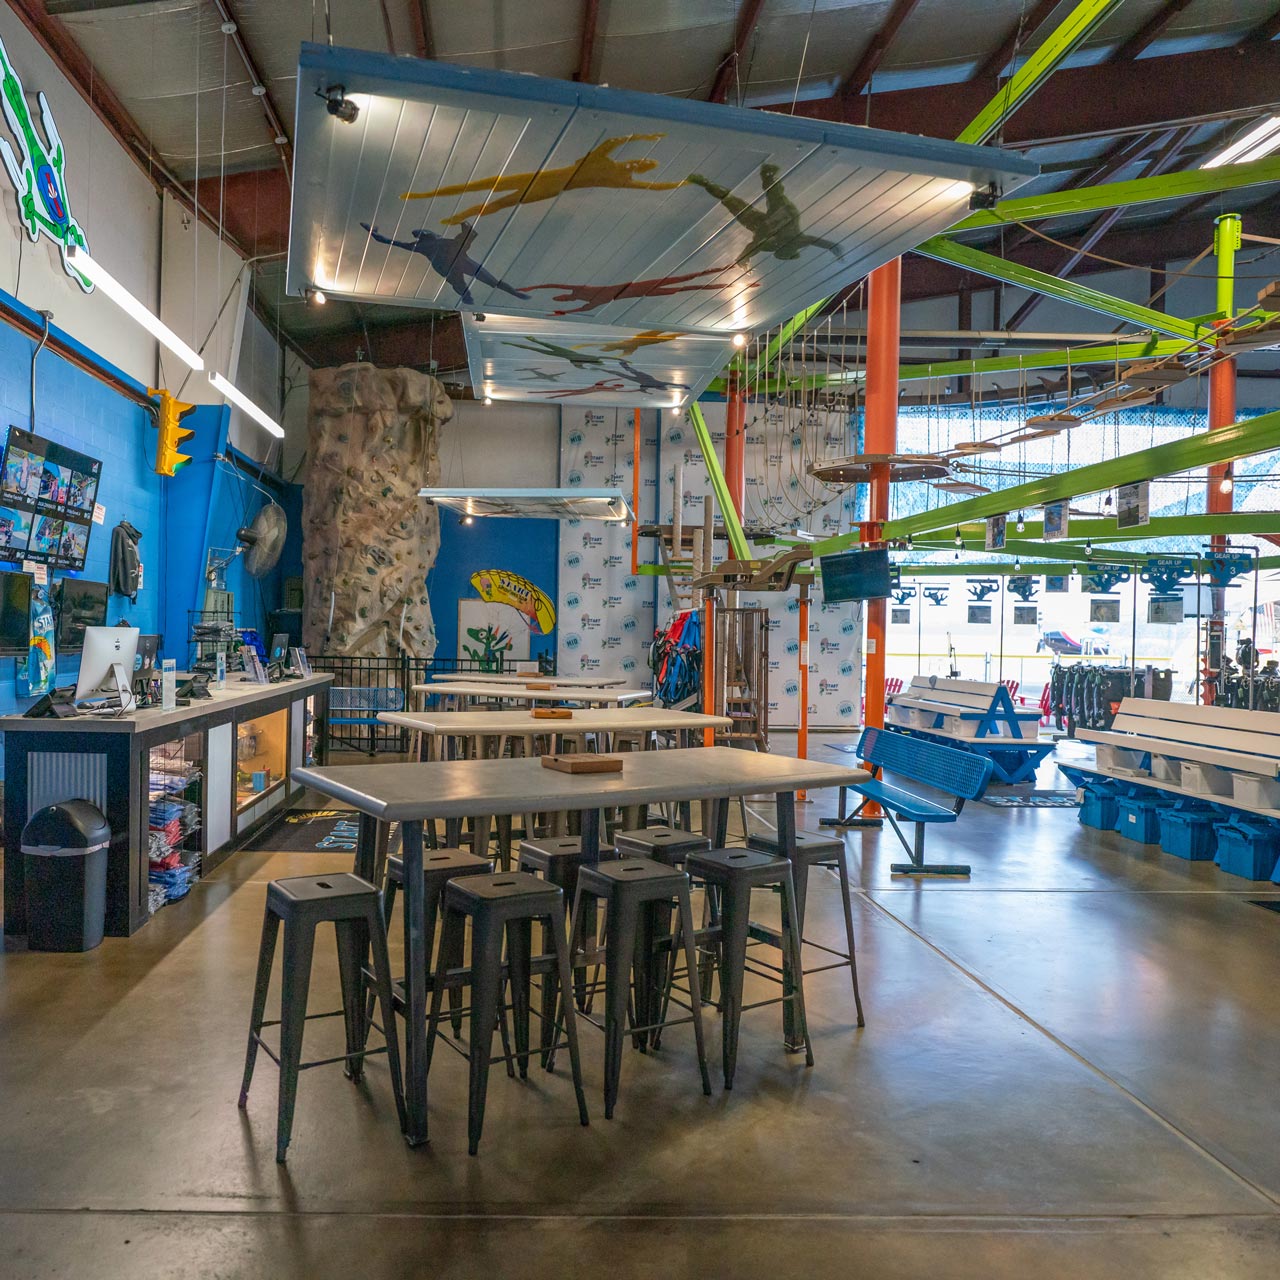 Inside Start Skydiving depicts a climbing wall, neon green ropes course, and tall tables for sitting.